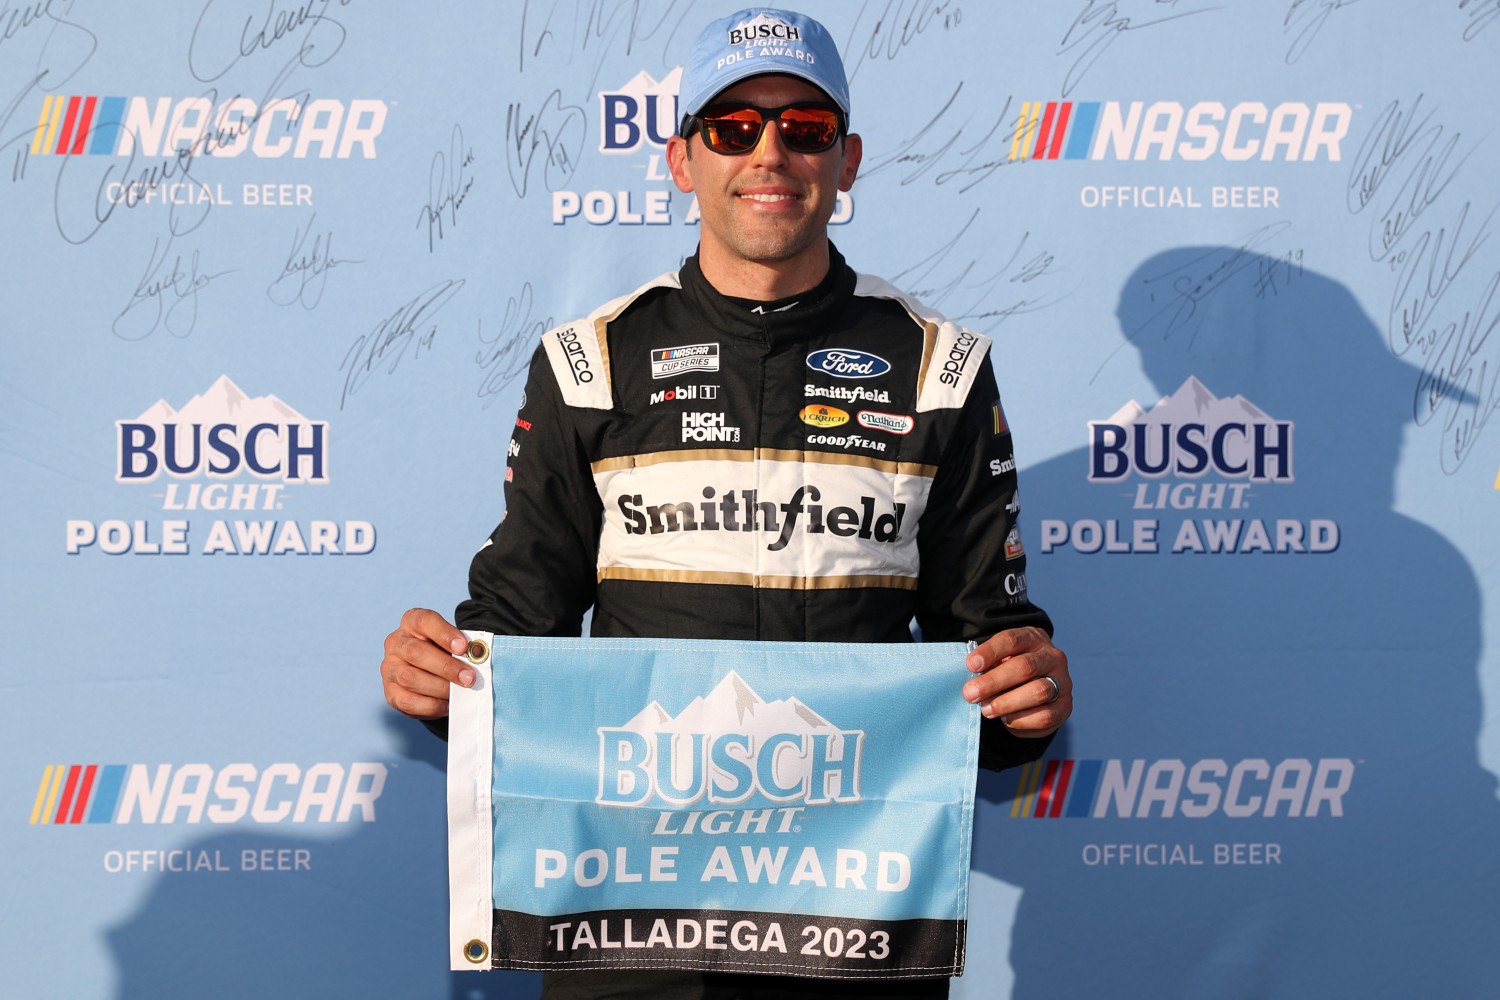 Aric Almirola, driver of the #10 Smithfield Ford, poses for photos after winning the pole award during qualifying for the NASCAR Cup Series YellaWood 500 at Talladega Superspeedway on September 30, 2023 in Talladega, Alabama. (Photo by Meg Oliphant/Getty Images)